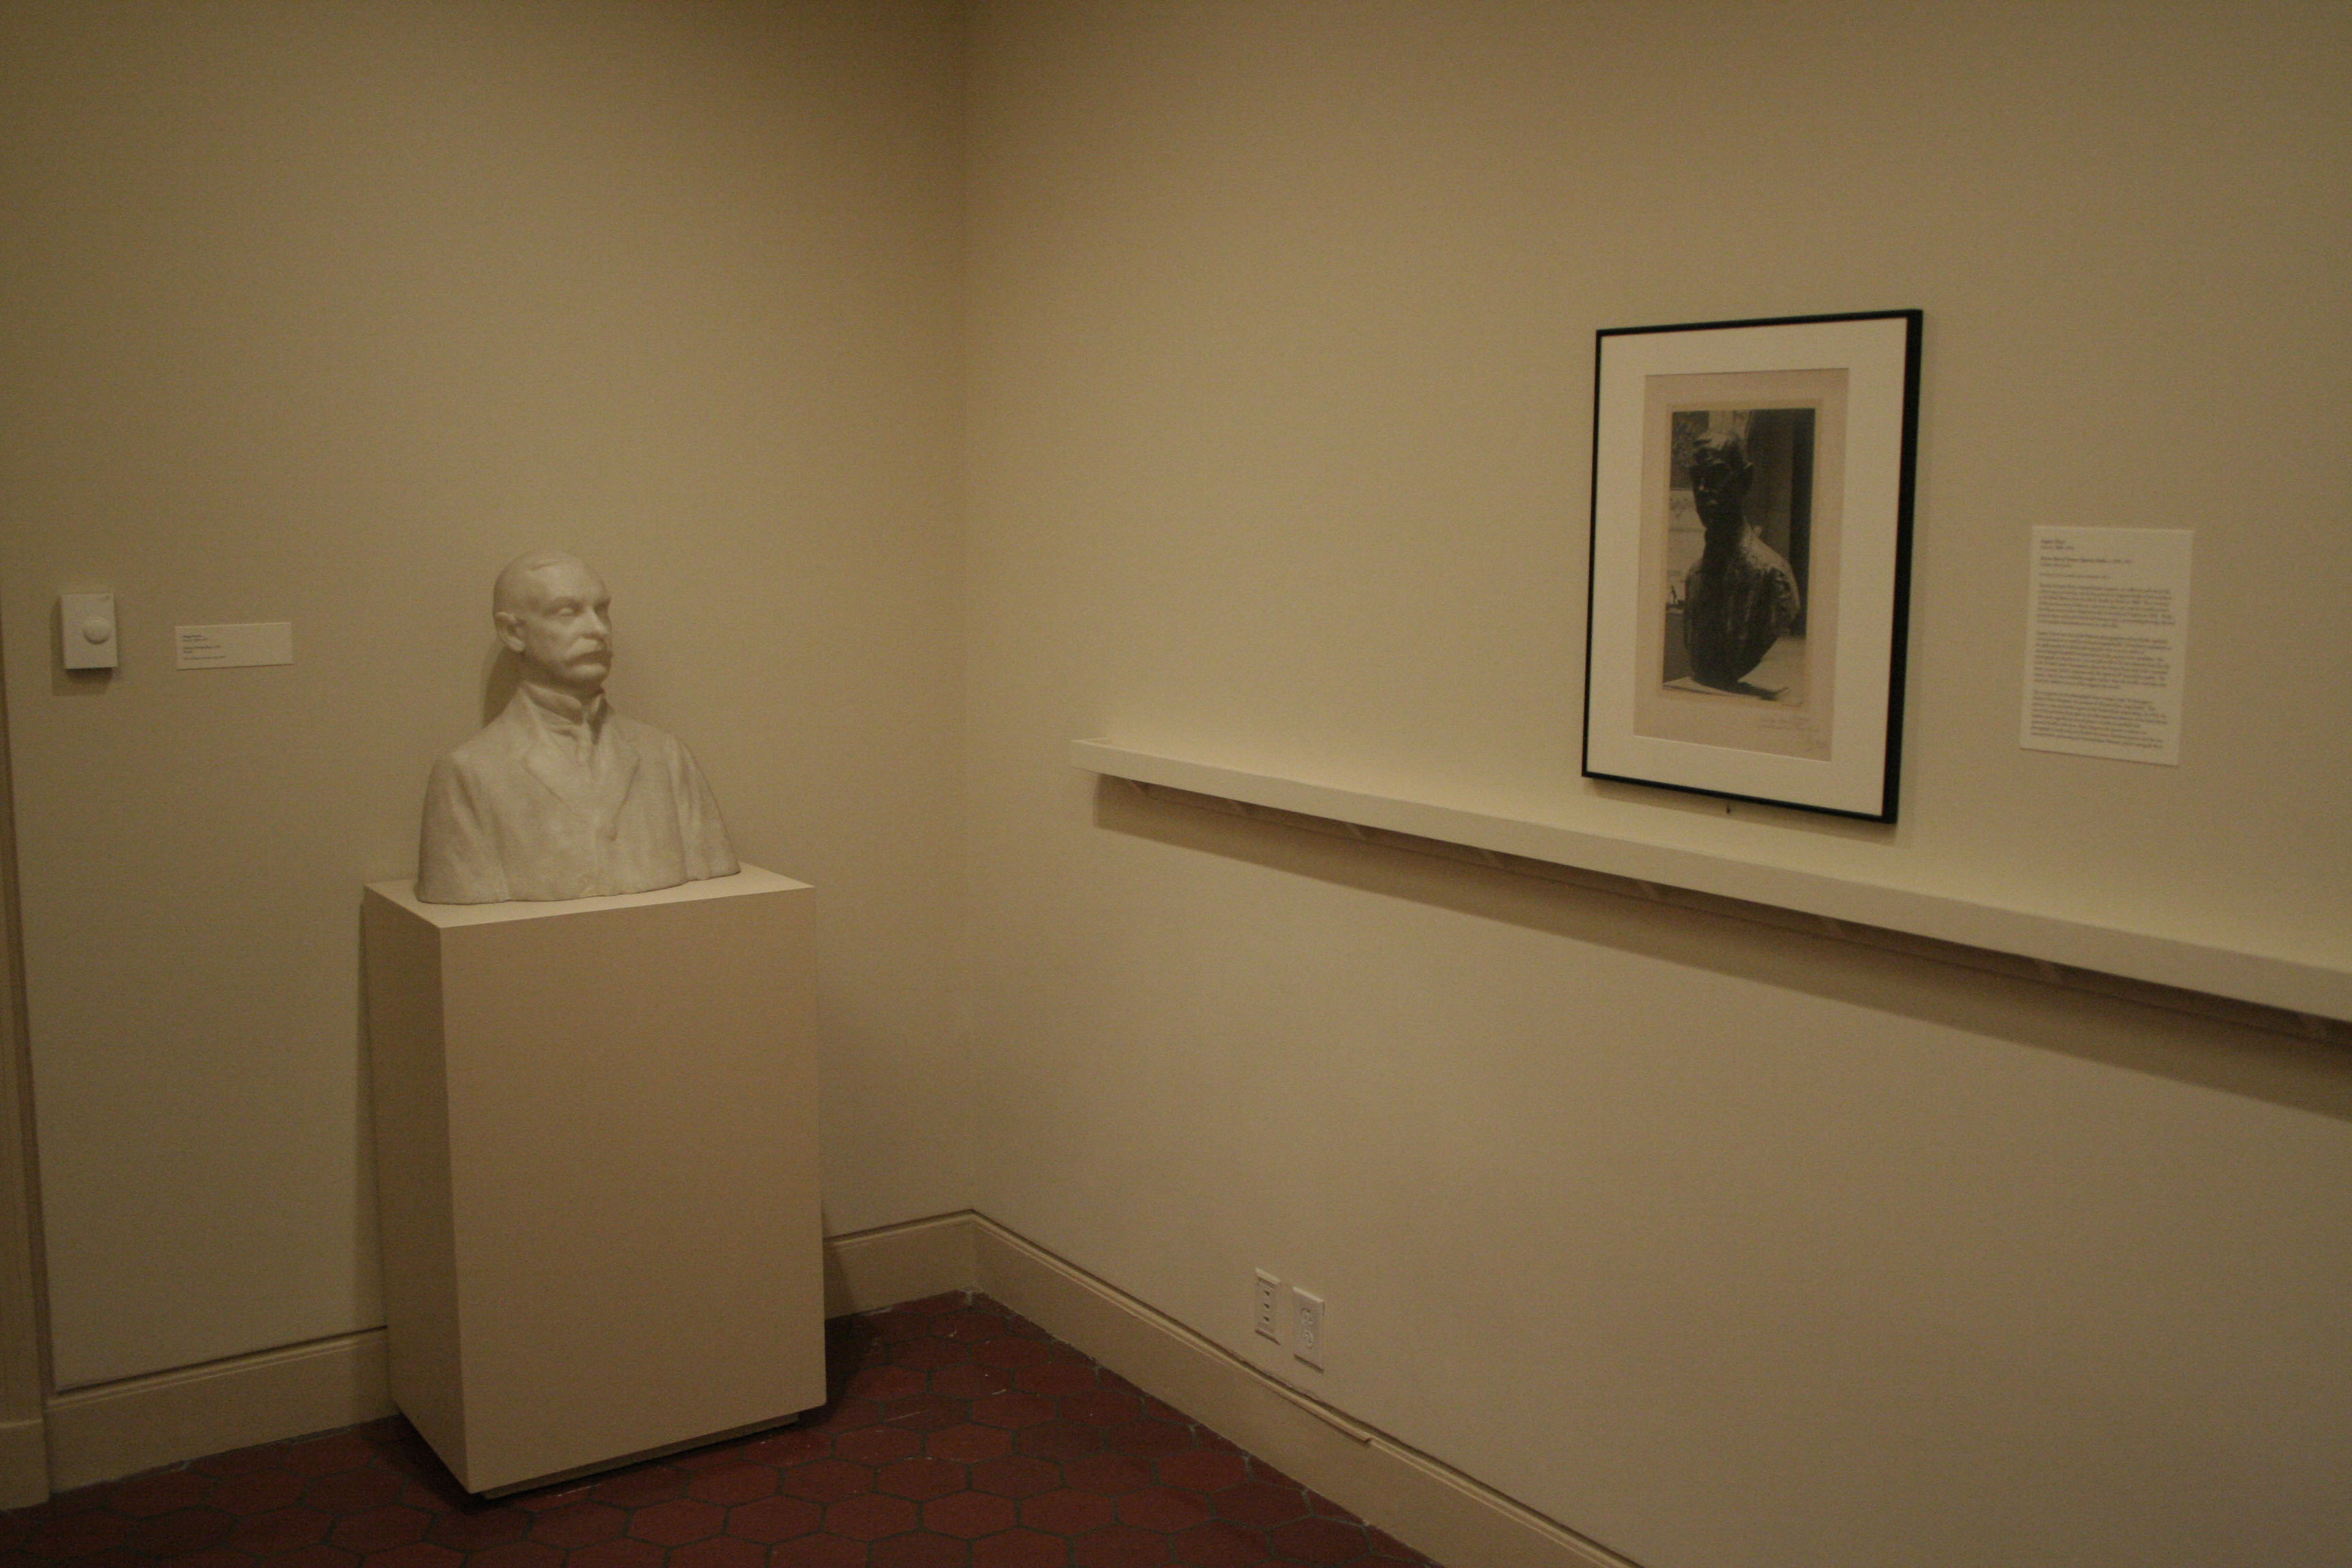 Bust of a man on a pedestal and a picture on a gallery wall